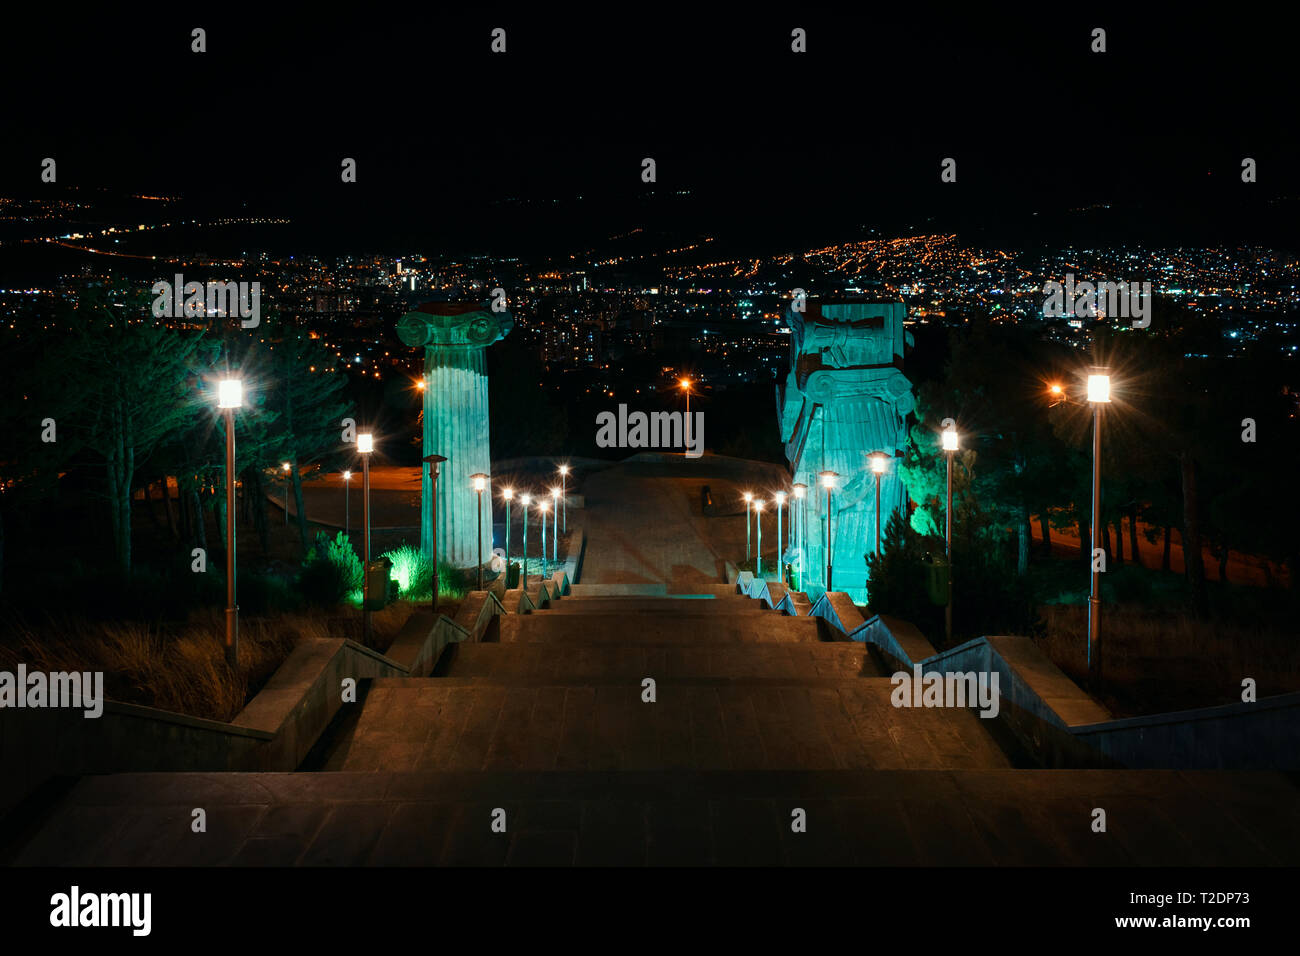 Georgia, Tbilisi - 05.02.2019. - View from the staircase of impressive monument Chronicles of Georgia on top of the hill. Outskirts of the city. Night Stock Photo